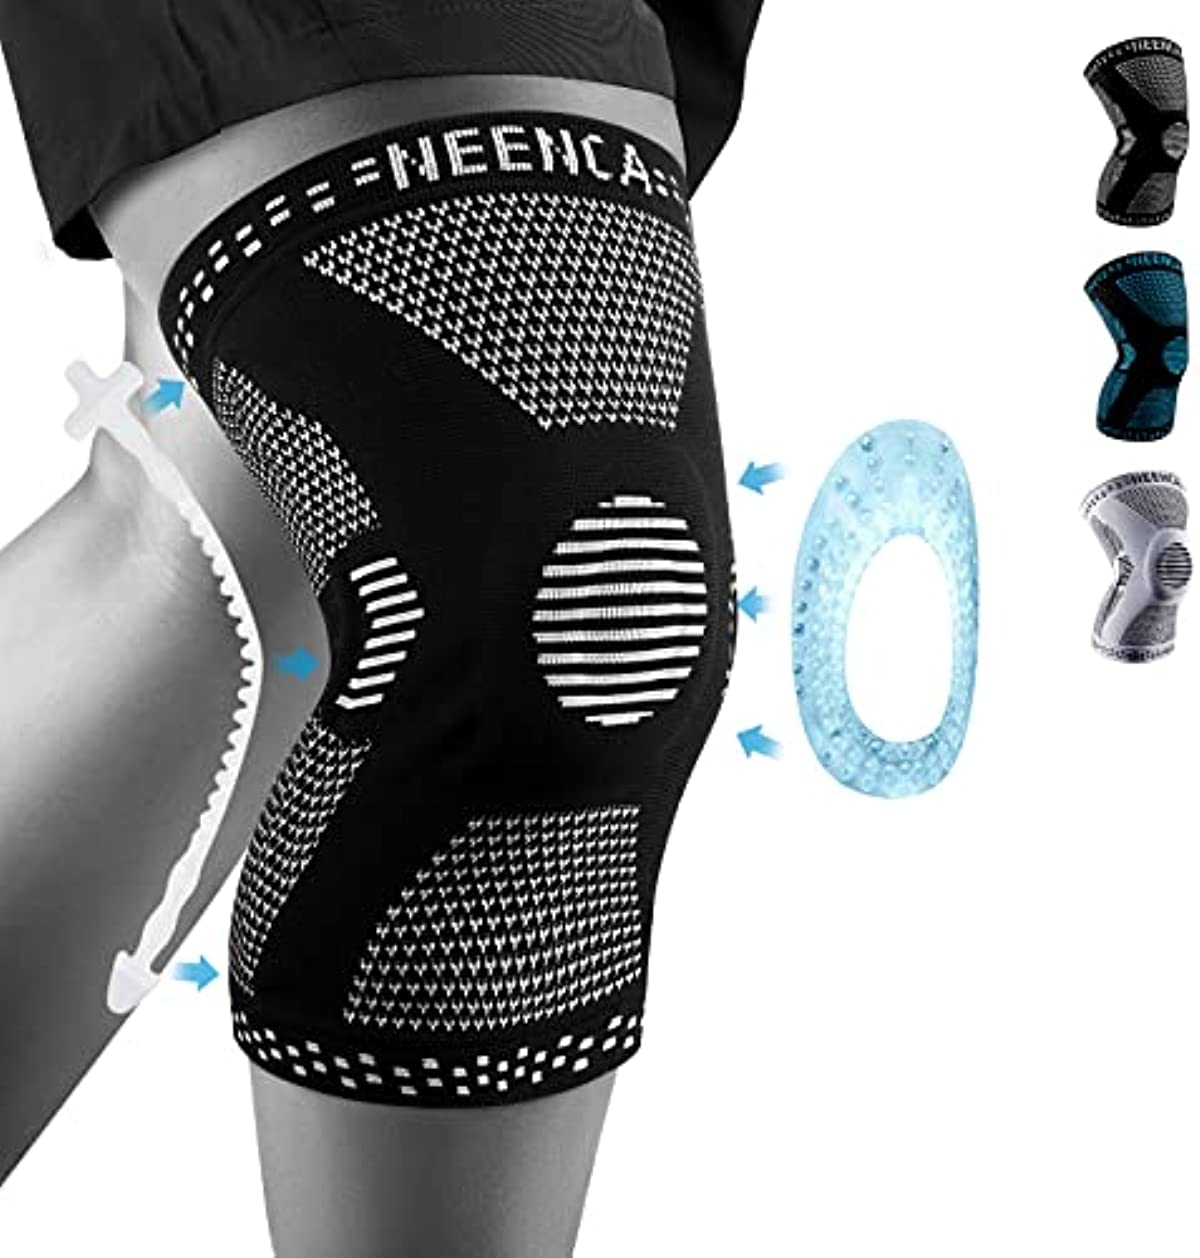 NEENCA Professional Plus Size Knee Brace, Knee Compression Sleeve for Larger Legs and Bigger Thighs, Medical Knee Support for Knee Pain Relief, Injury Recovery, Sports Protection, Single(2XL-5XL)